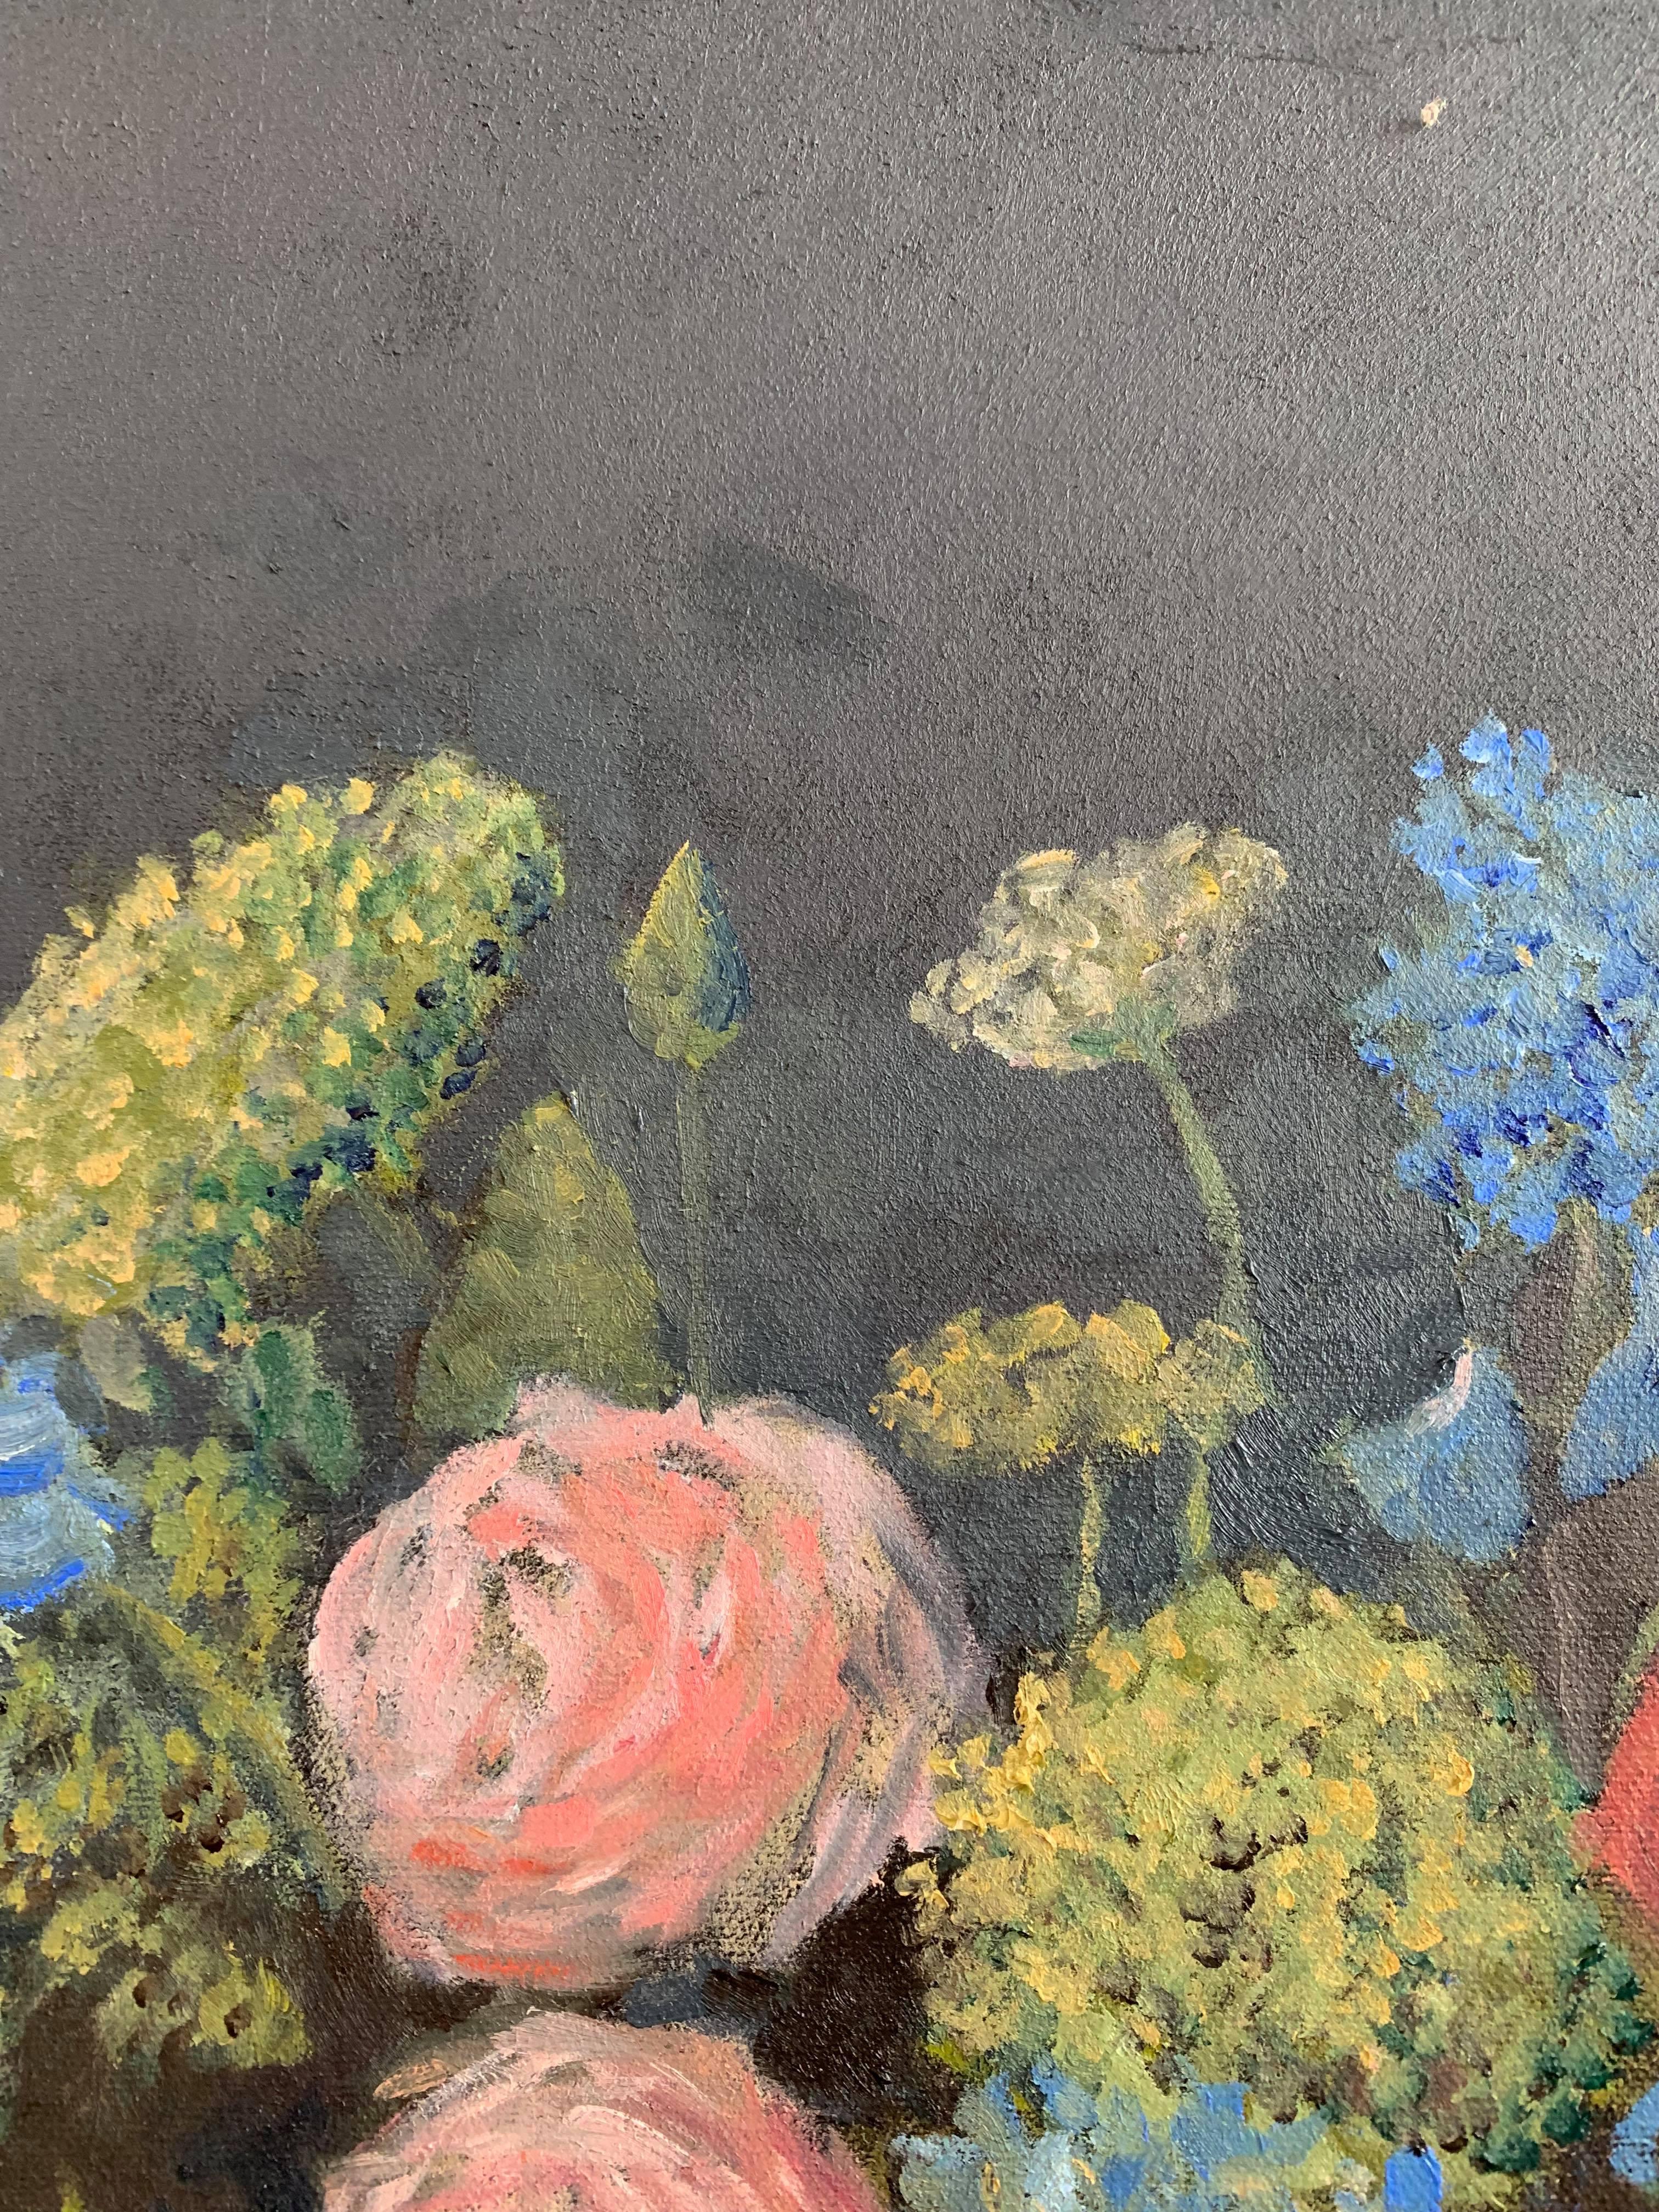 This oil on canvas still life painting presents abundant flowers in a brown vase. The wide canvas creates a panorama of flowers to look at. There are shades of cadmium red, beautiful rose pink, and cerulean blues. The neutral gray background and